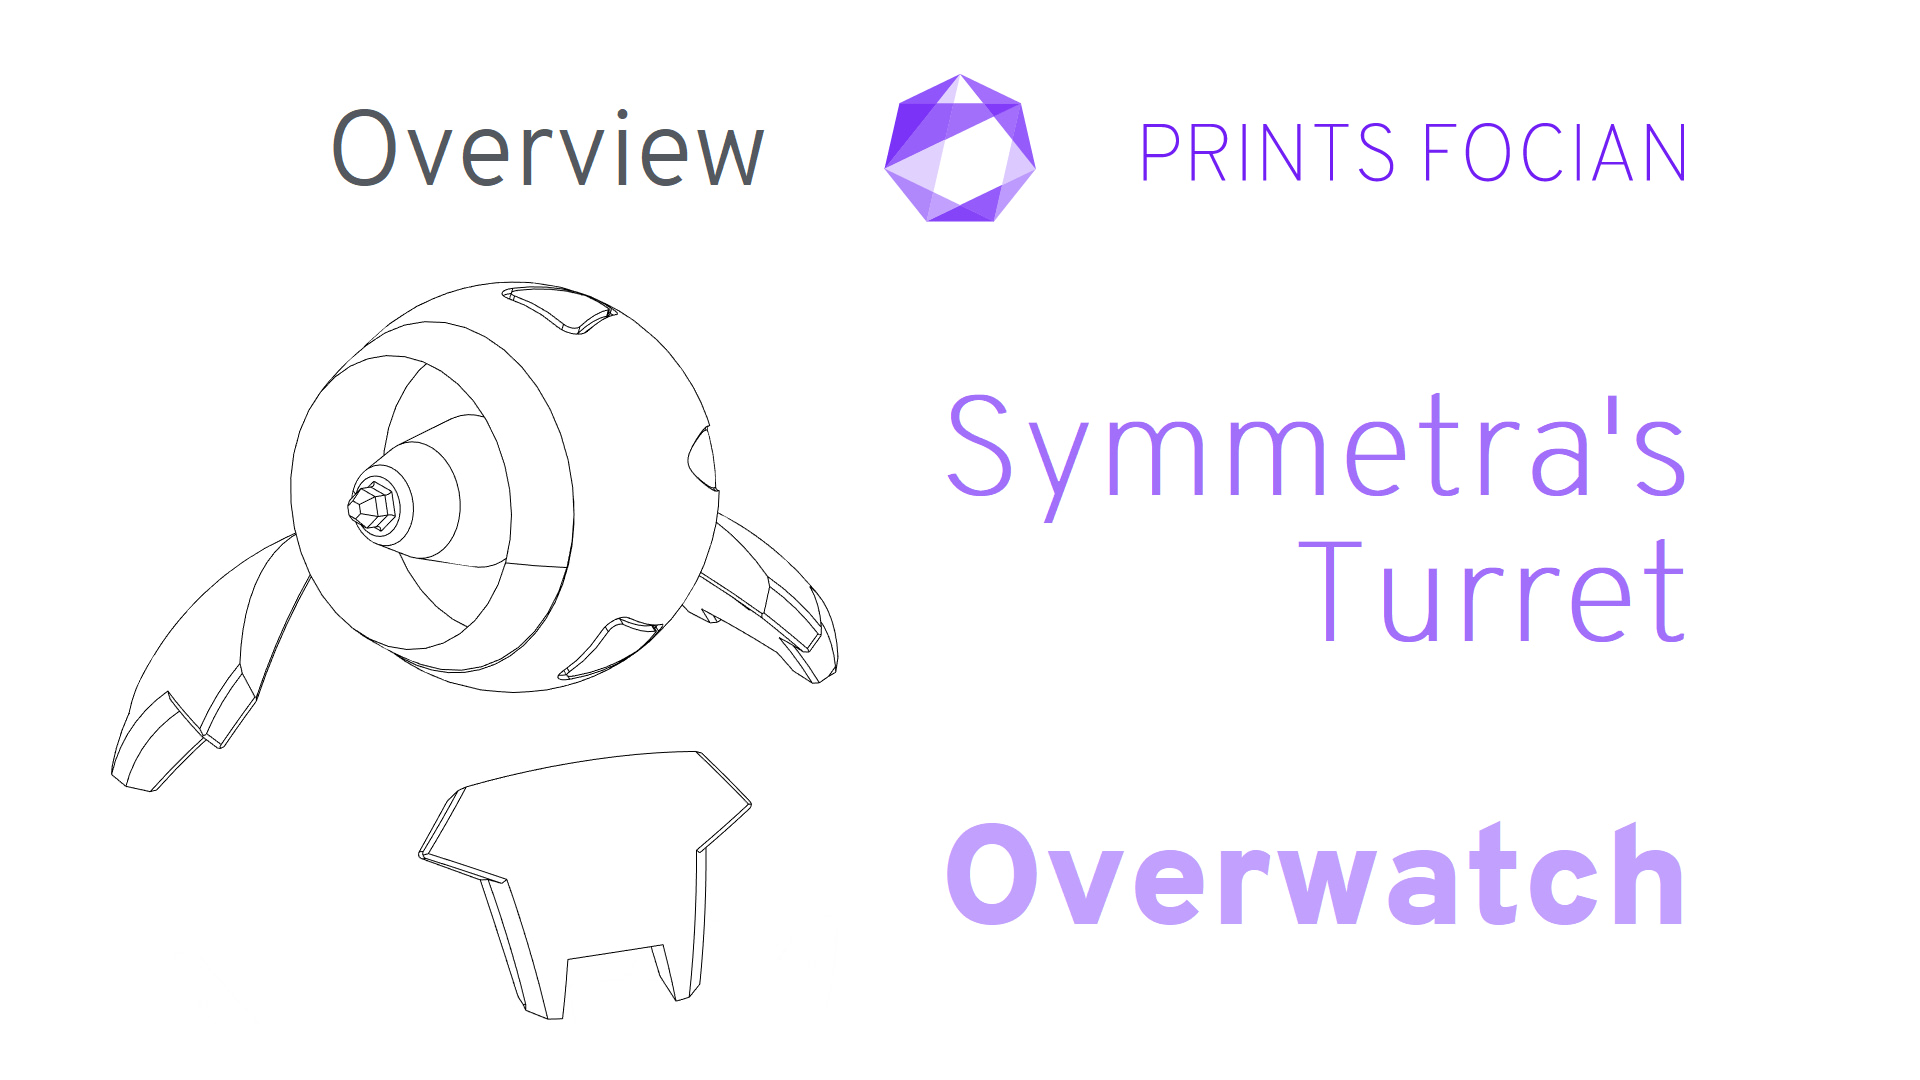 Wireframe image of Symmetra's Turret on a white background. Prints Focian Icon top and central. Text: Purple Prints Focian, Symmetra's Turret, Overwatch and dark grey Overview